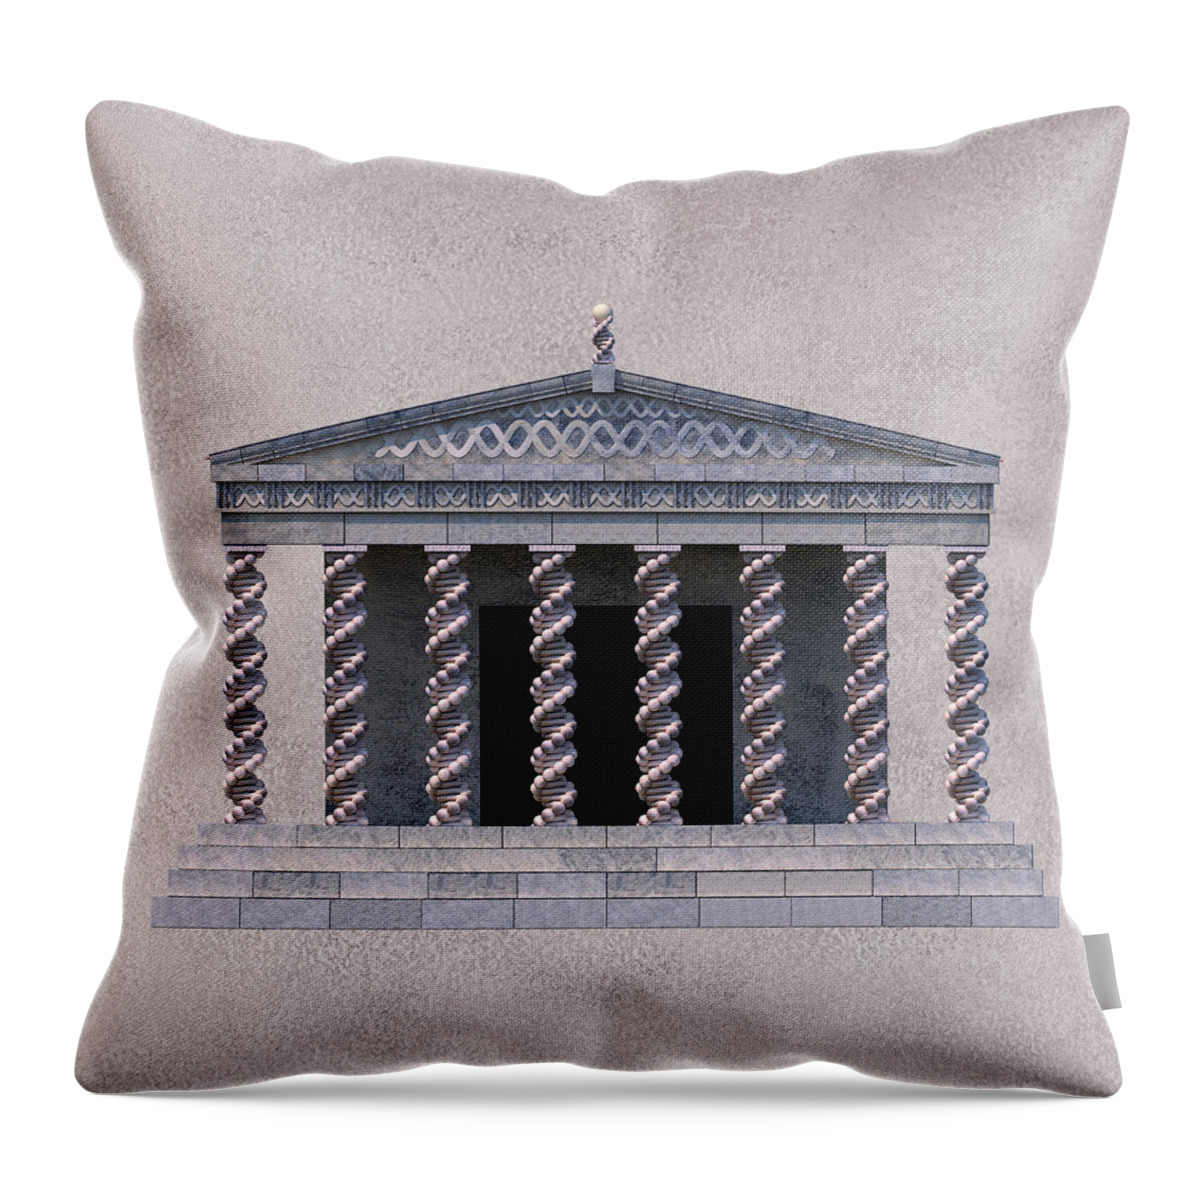 Dna Throw Pillow featuring the digital art Temple of Life Architectural Elevation by Russell Kightley